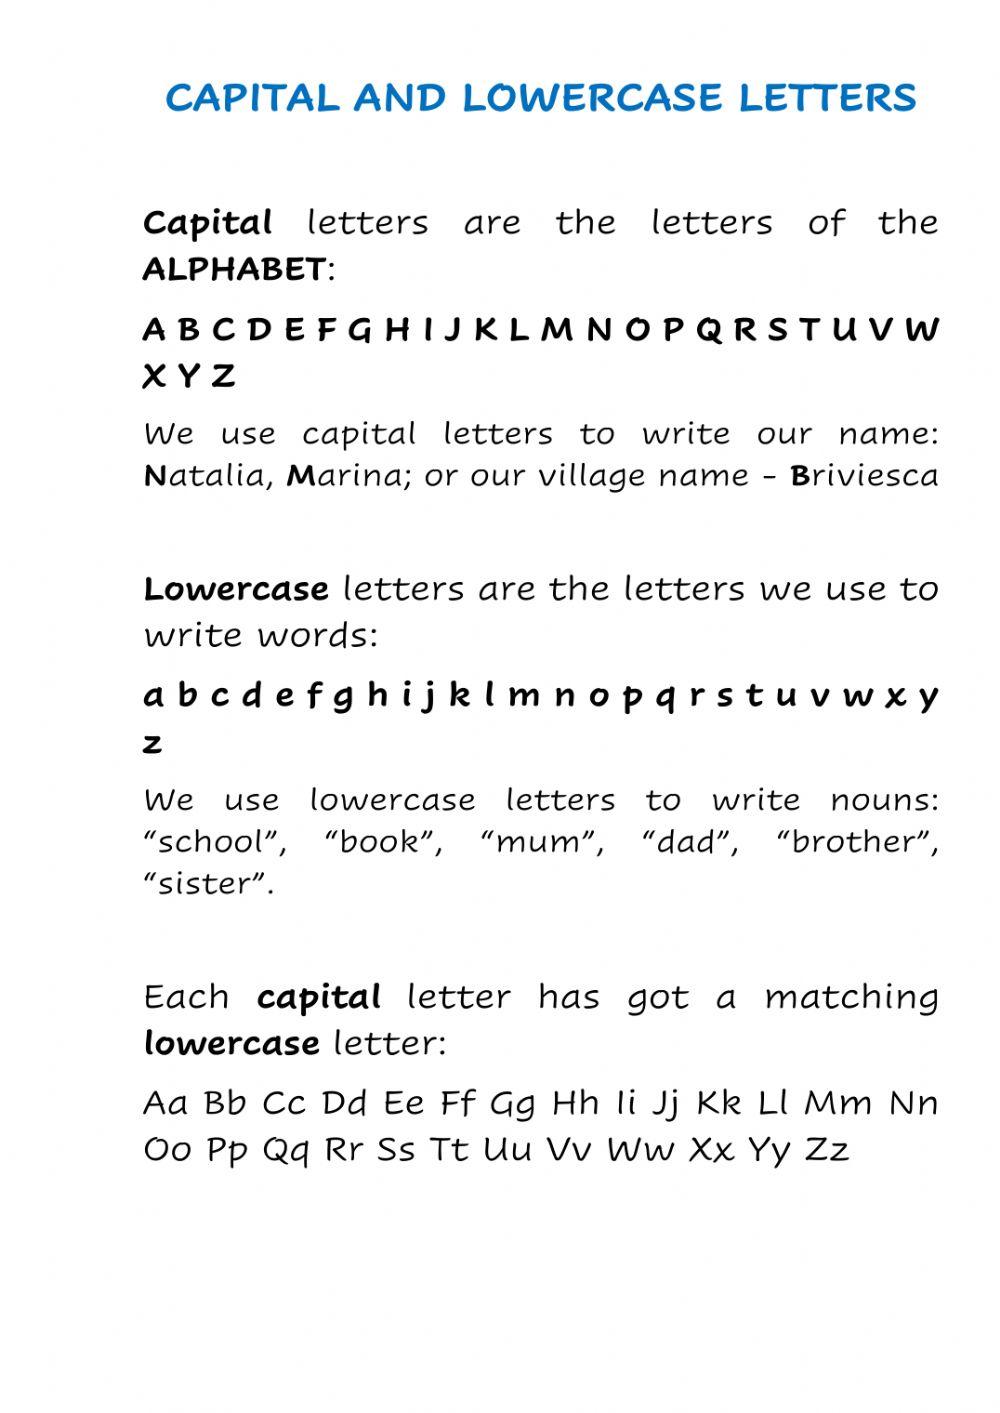 Matching letters 1